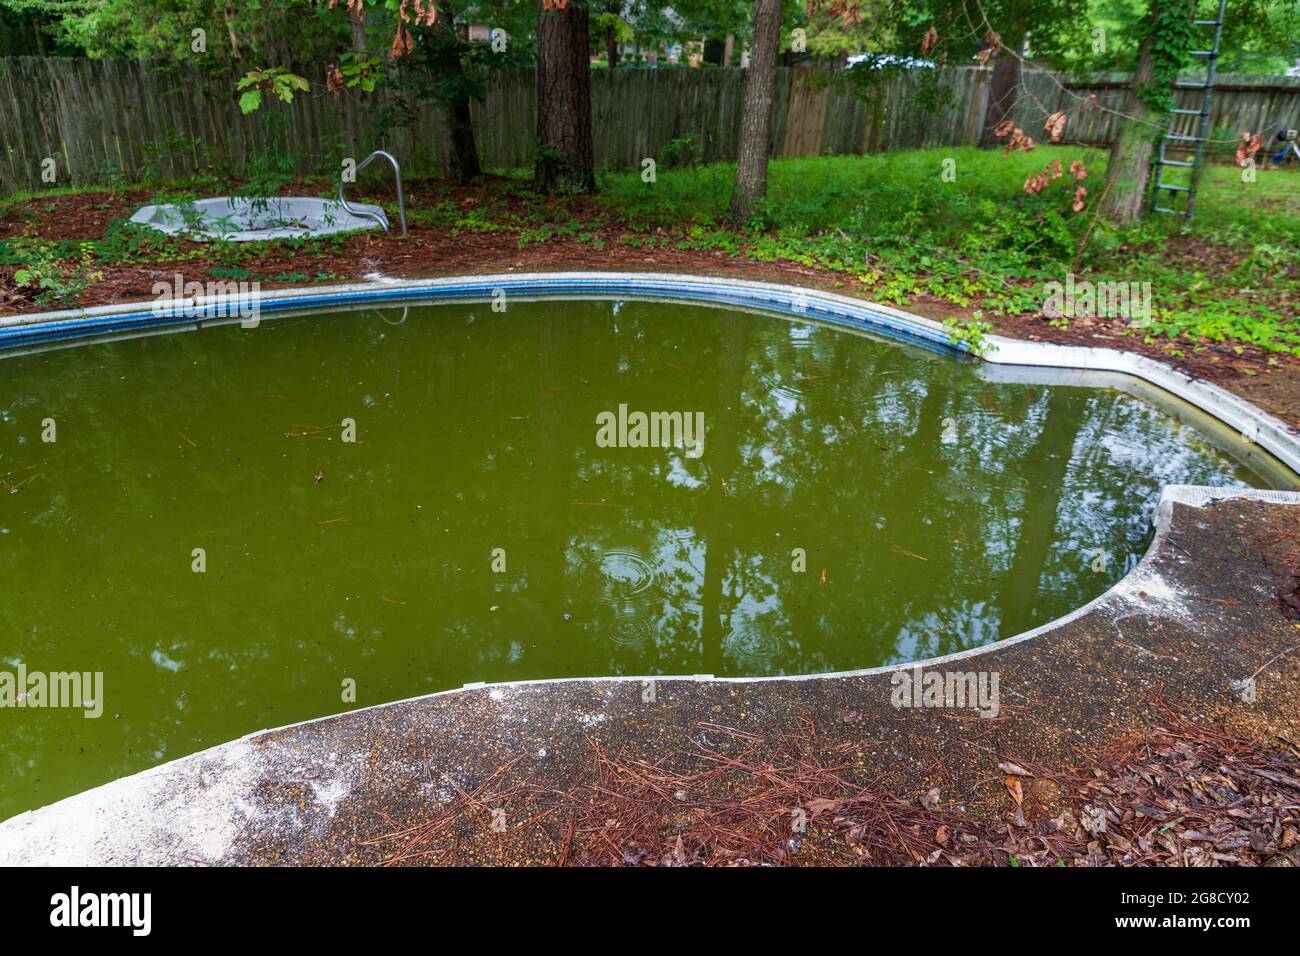 Abandoned and filthy swimming pool in disrepair. Stock Photo